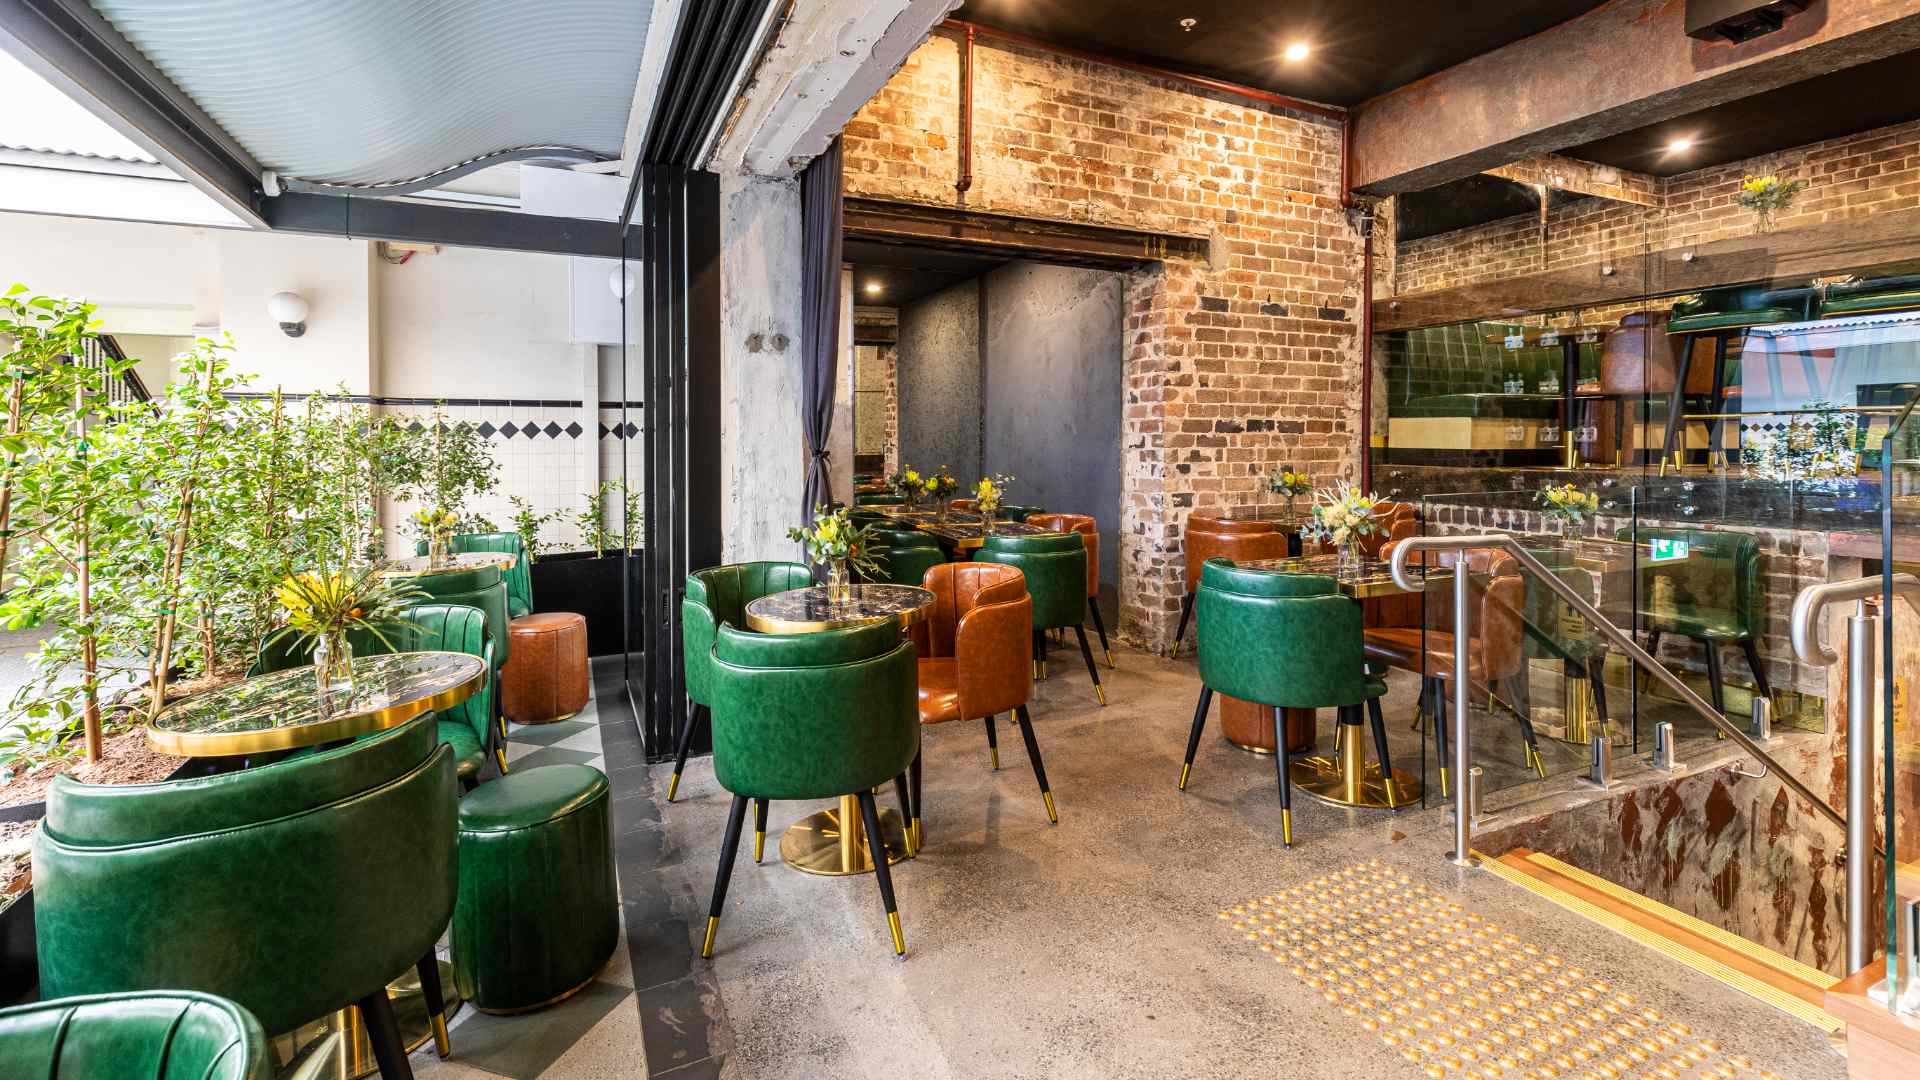 Kings Cross Distillery Is the 1920s-Inspired Cocktail Bar Located in a Former Illegal Gambling Den